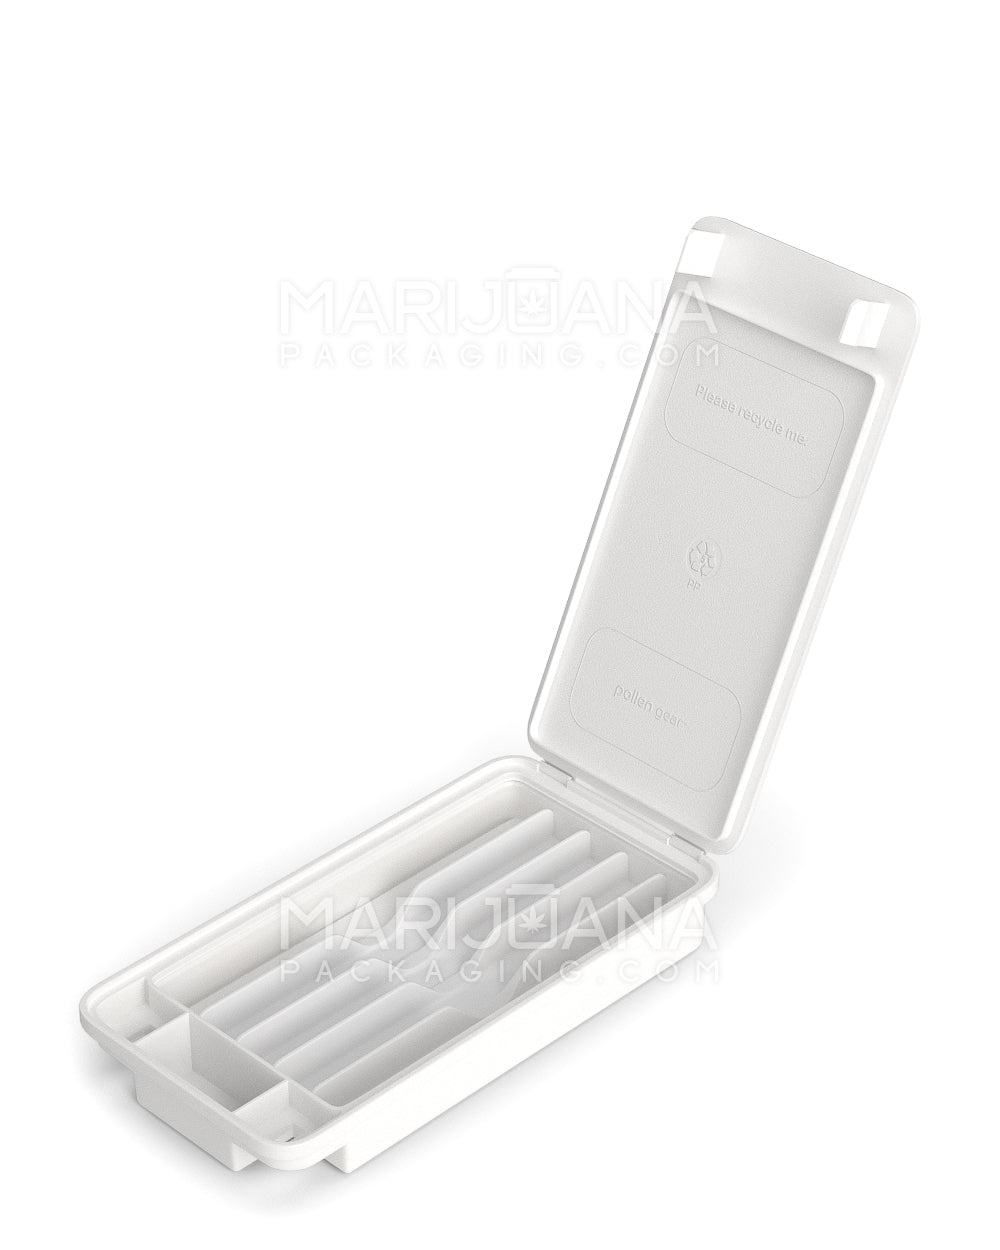 POLLEN GEAR | SnapTech Large White Plastic Insert Tray | 25mm - Foam - 2500 Count - 6